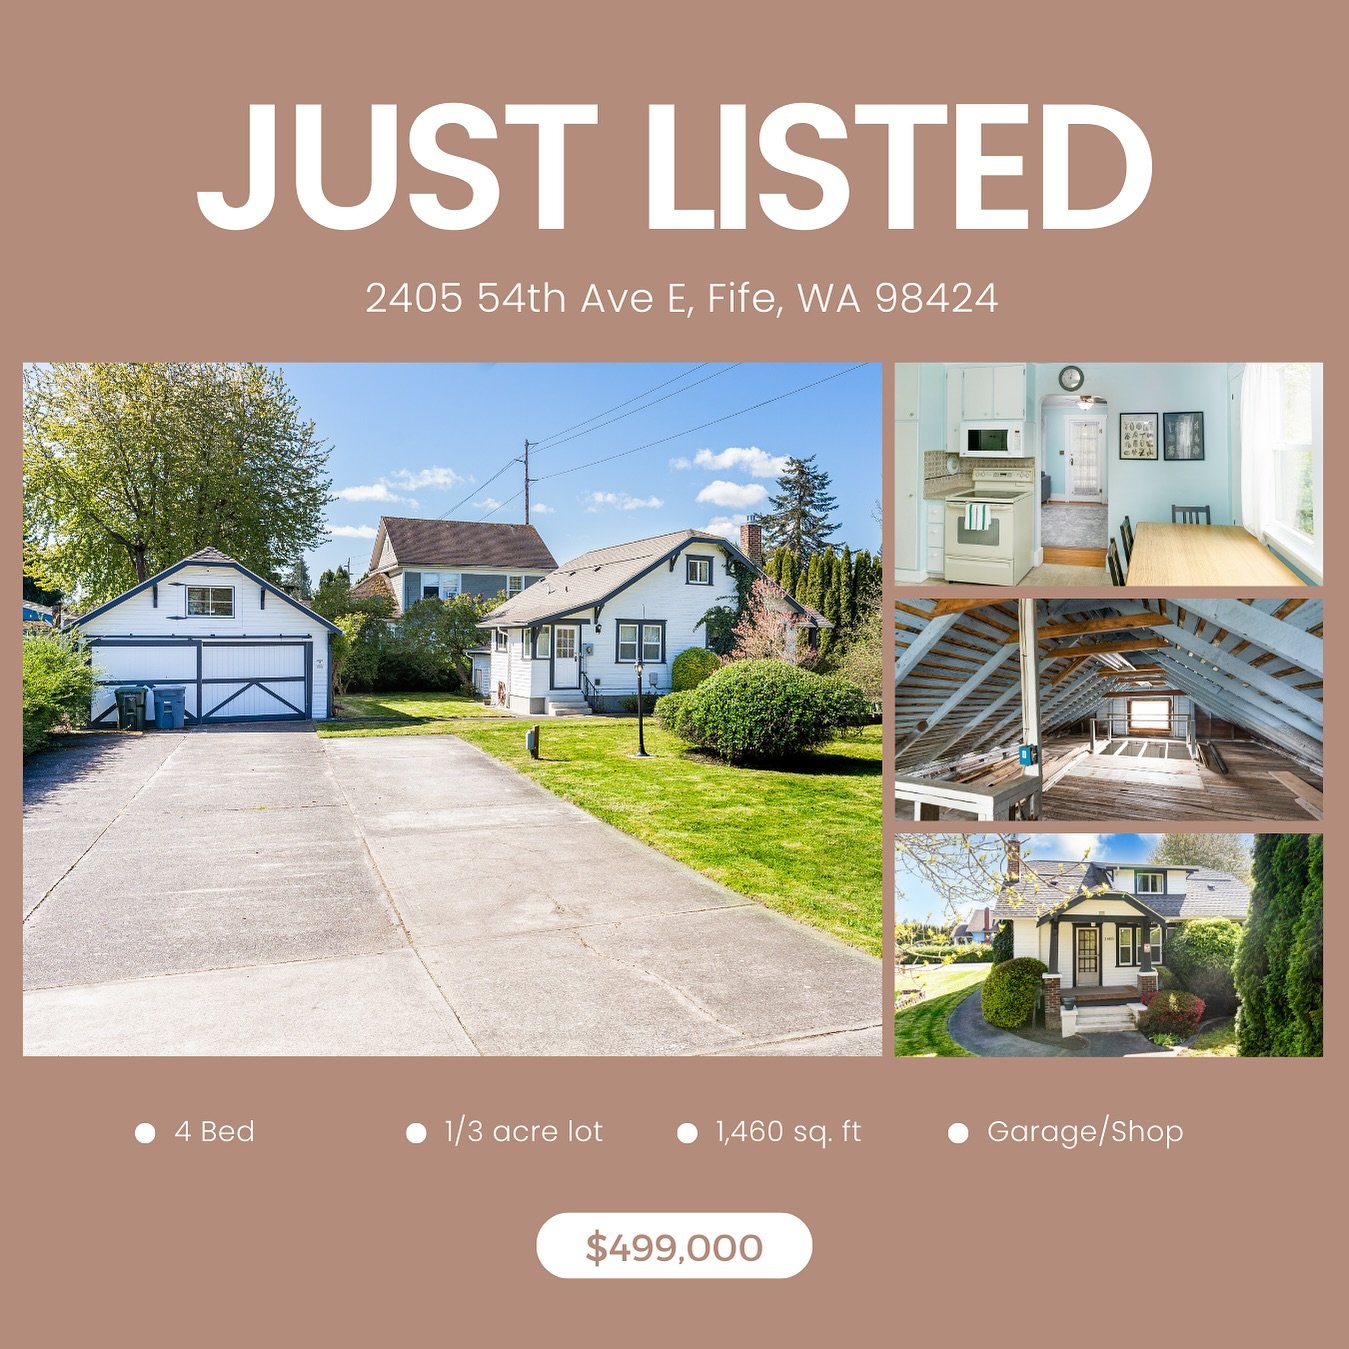 Happy weekend! Newest Kindred Realty listing in Fife, WA!